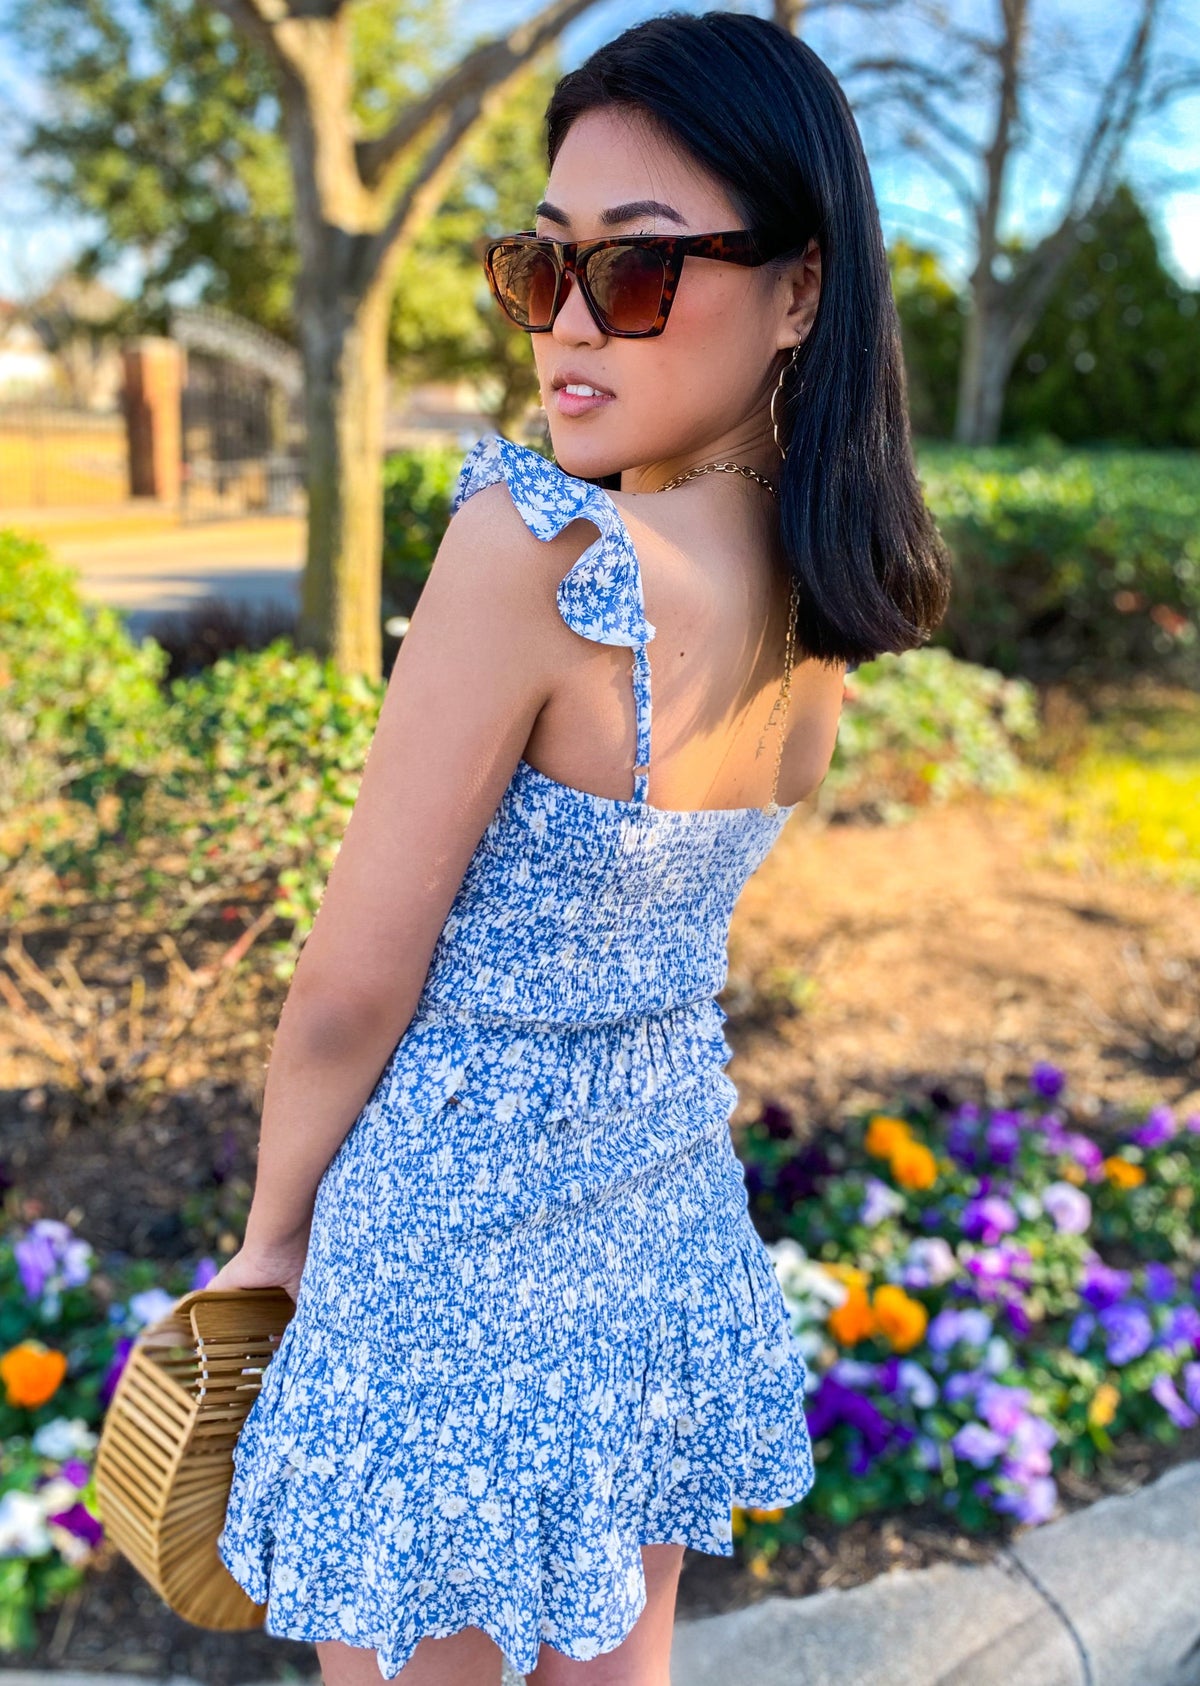 FLORAL PRINT SMOCKED TOP AND SKIRT (Sold Separately)